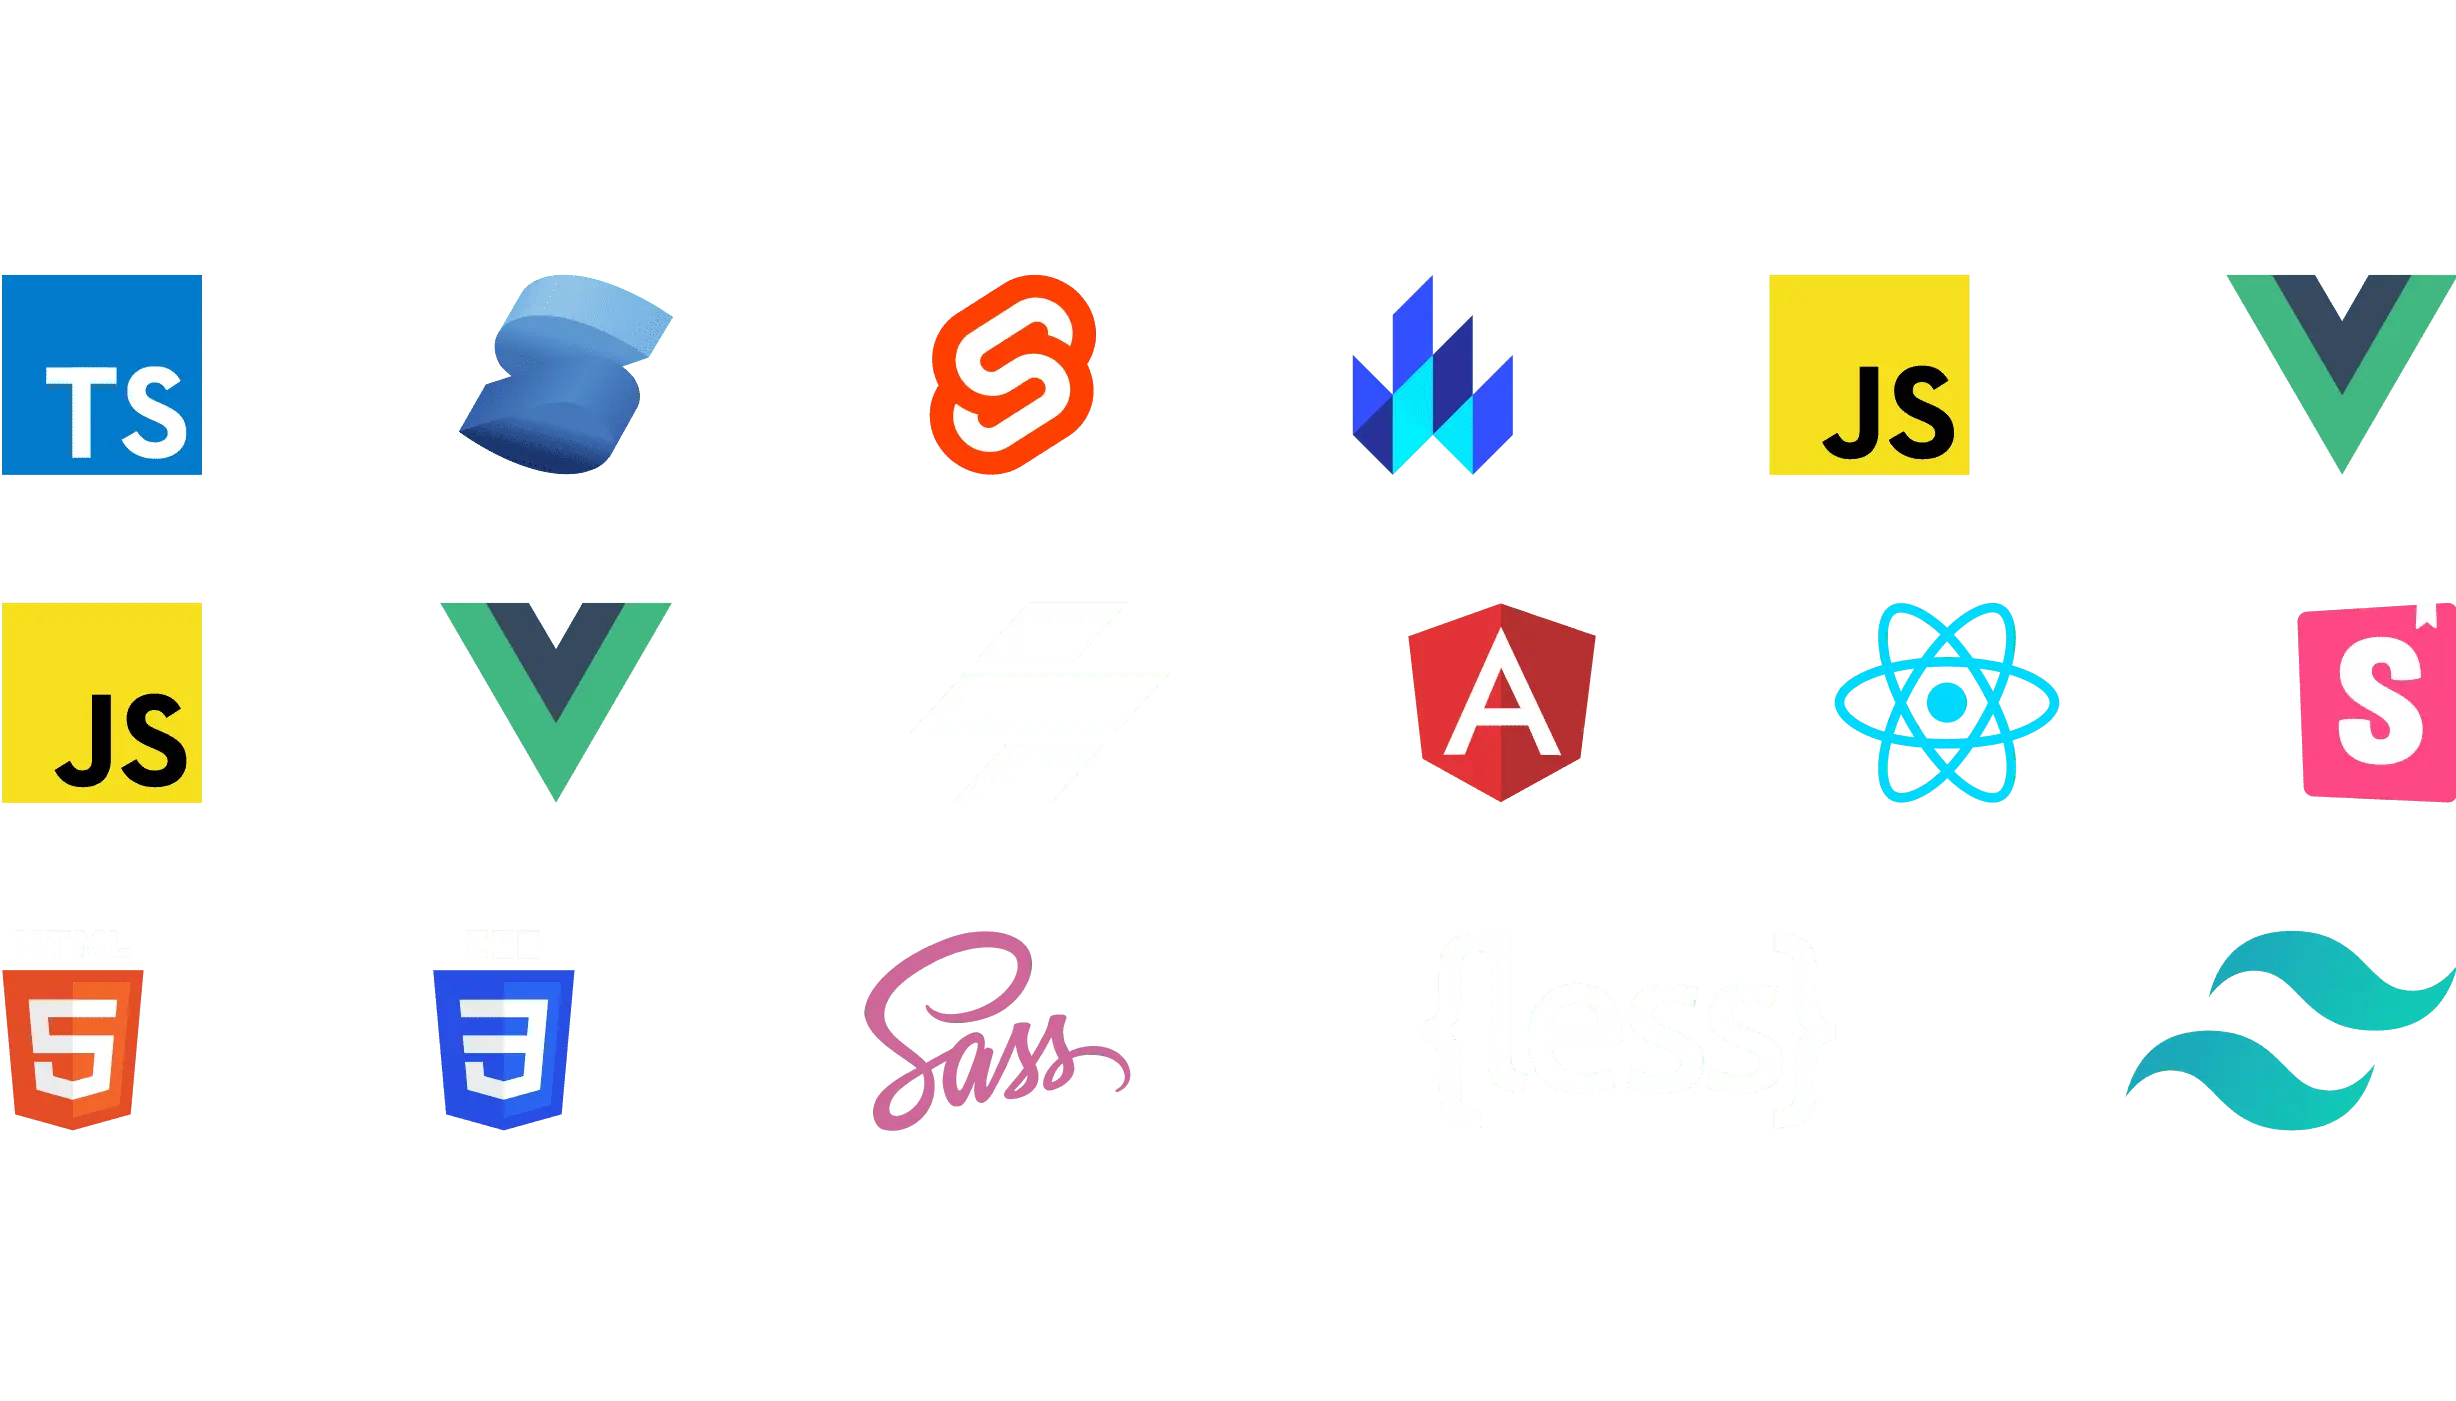 Logos of Typescript, Solid, Lit, Javascript, Vue.js, Stencil, Angular, Storybook, Adobe, Svelte, HTML5, CSS3, React, Sass, Less and Tailwind